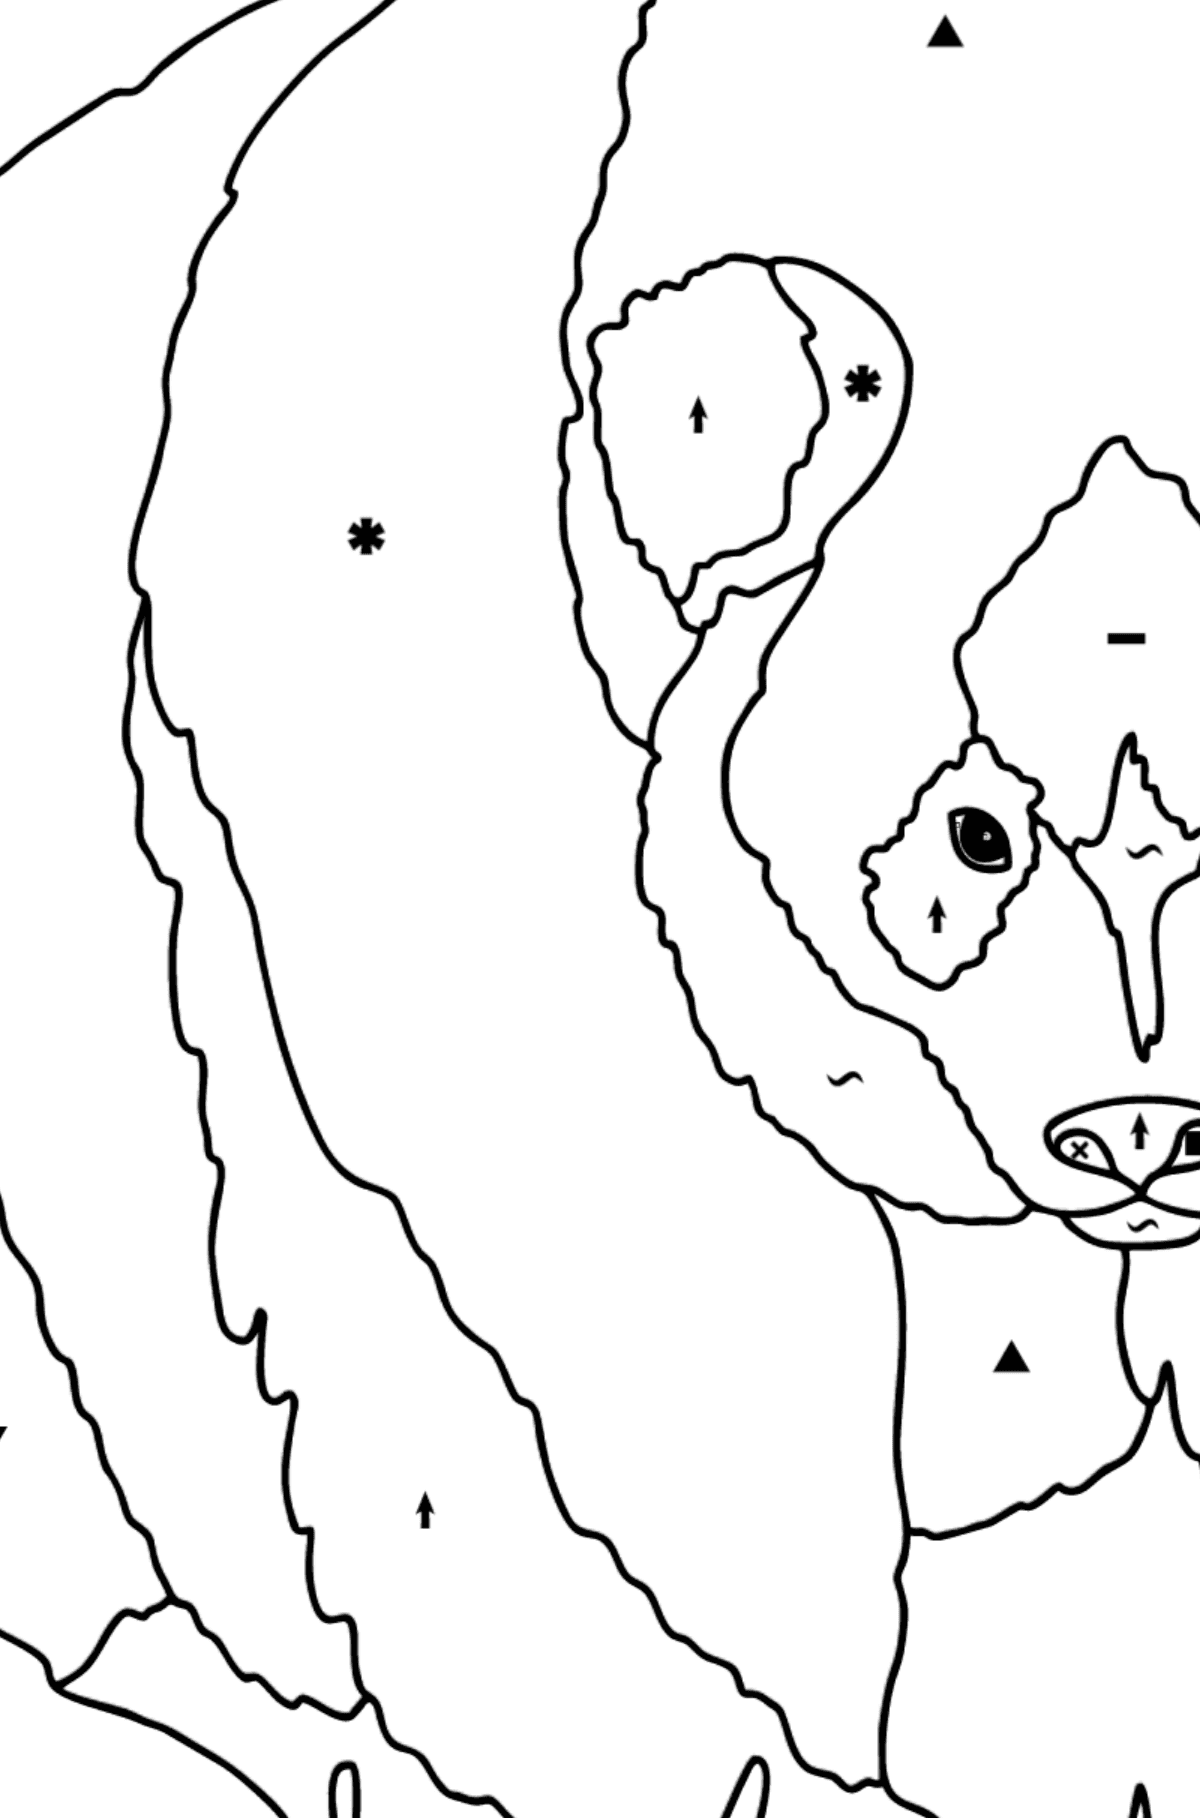 Coloring Page - A Panda is on a Hunt - Coloring by Symbols for Kids